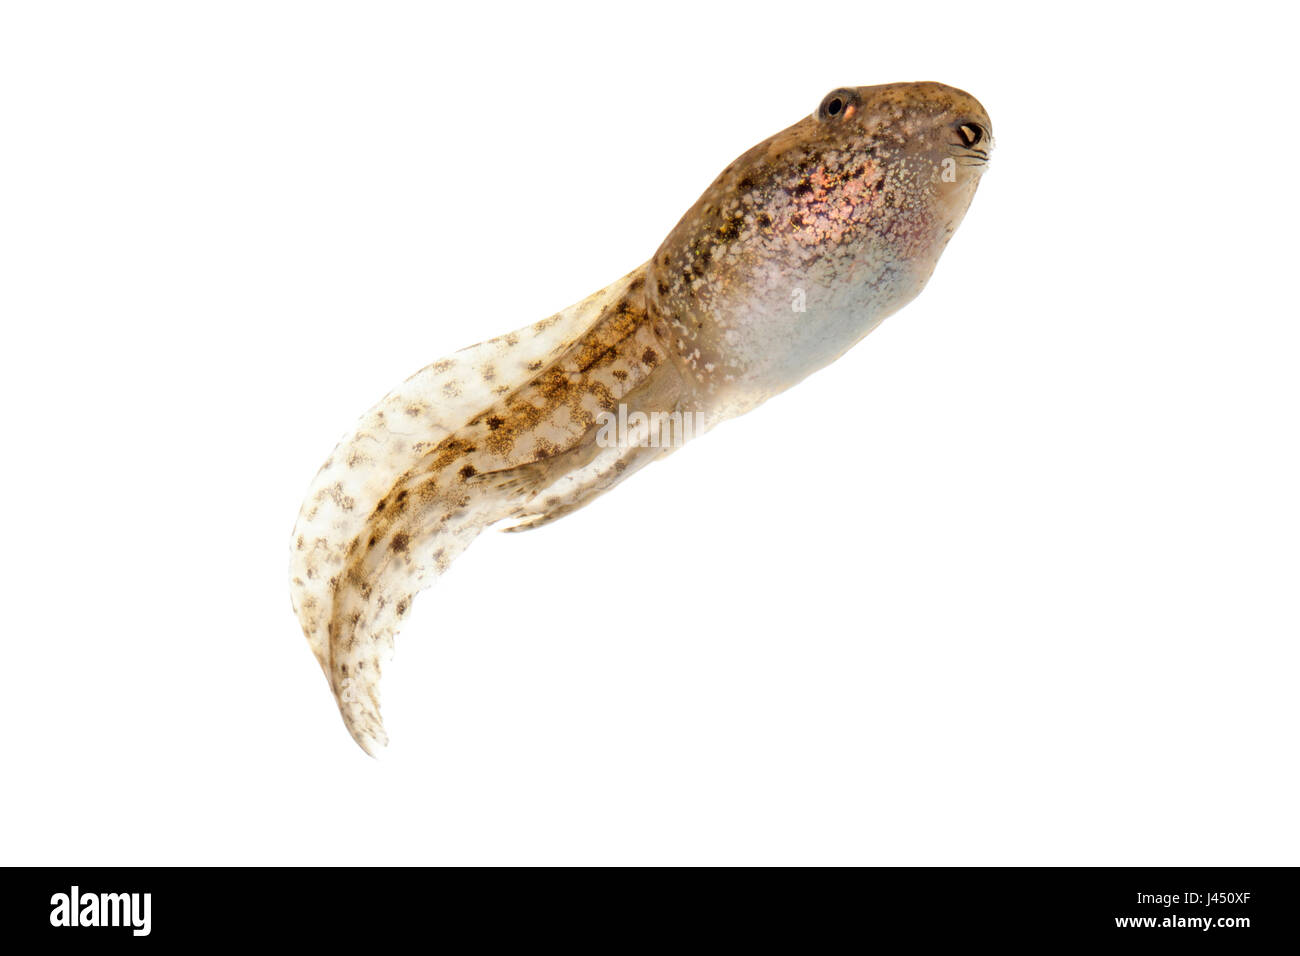 tadpole of green frog isolated against a white background Stock Photo